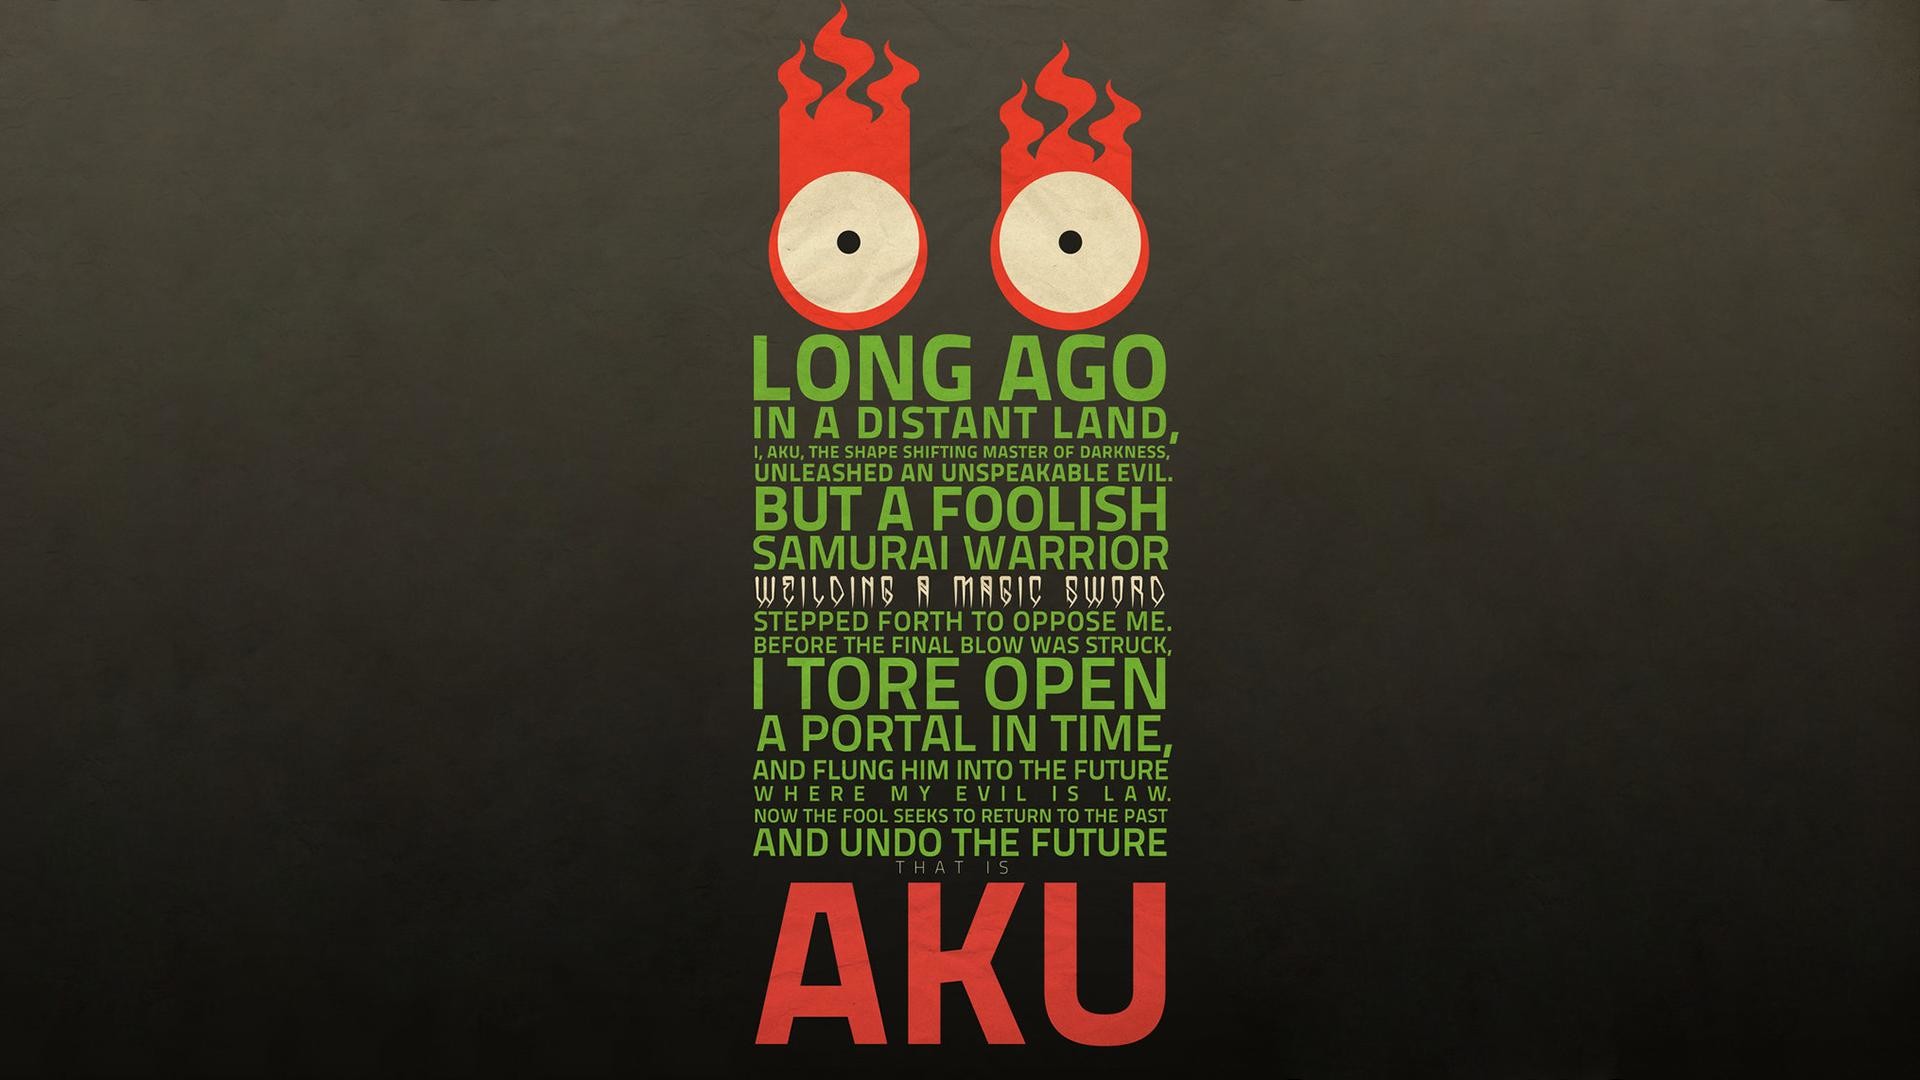 1920x1080 For the Samurai Jack fans out there